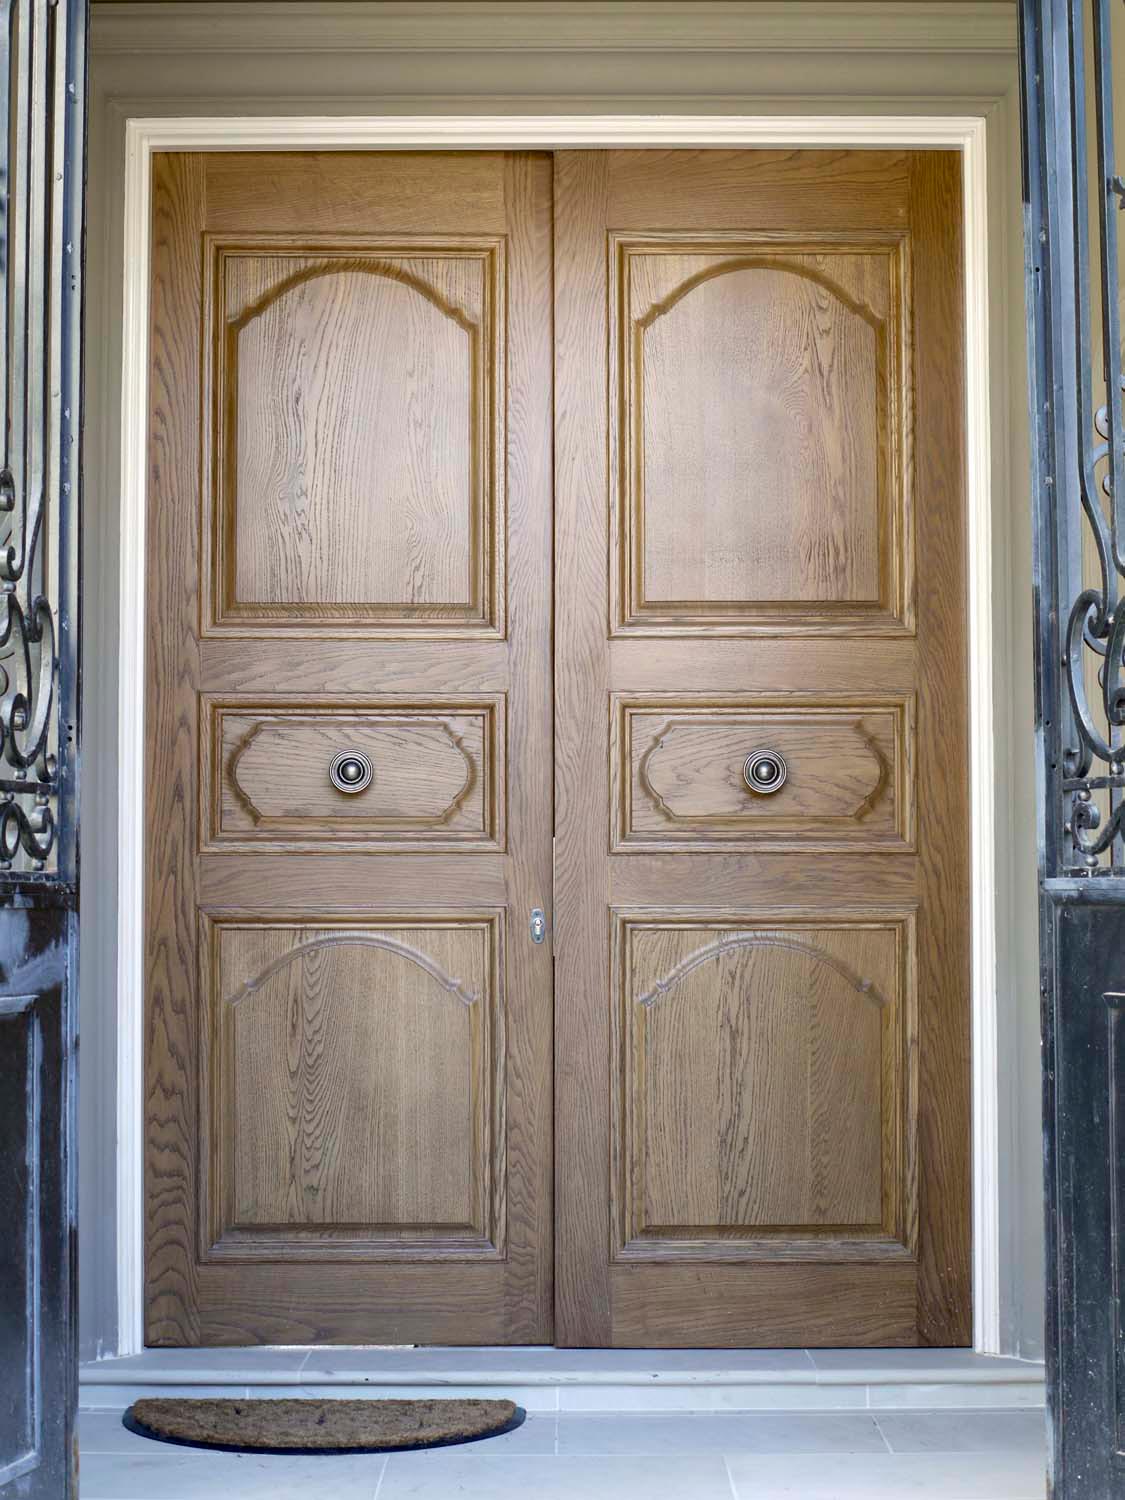 6 Front door design and custom build in any finish to suit your home